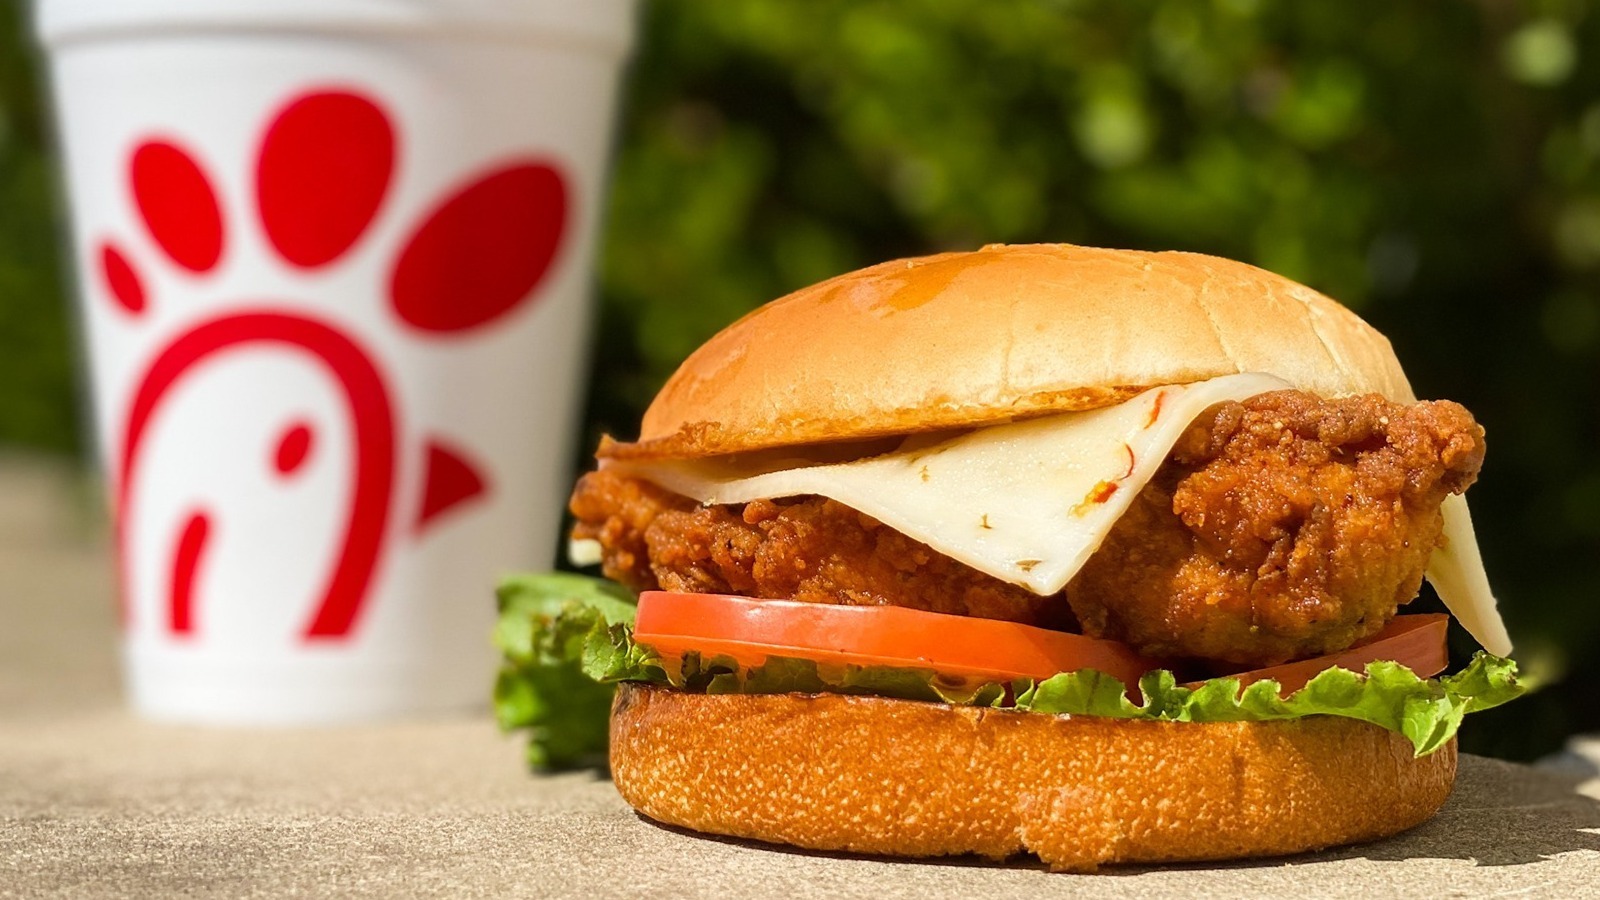 The Chicago ChickFilA That Gives Away Free Chicken Sandwiches When